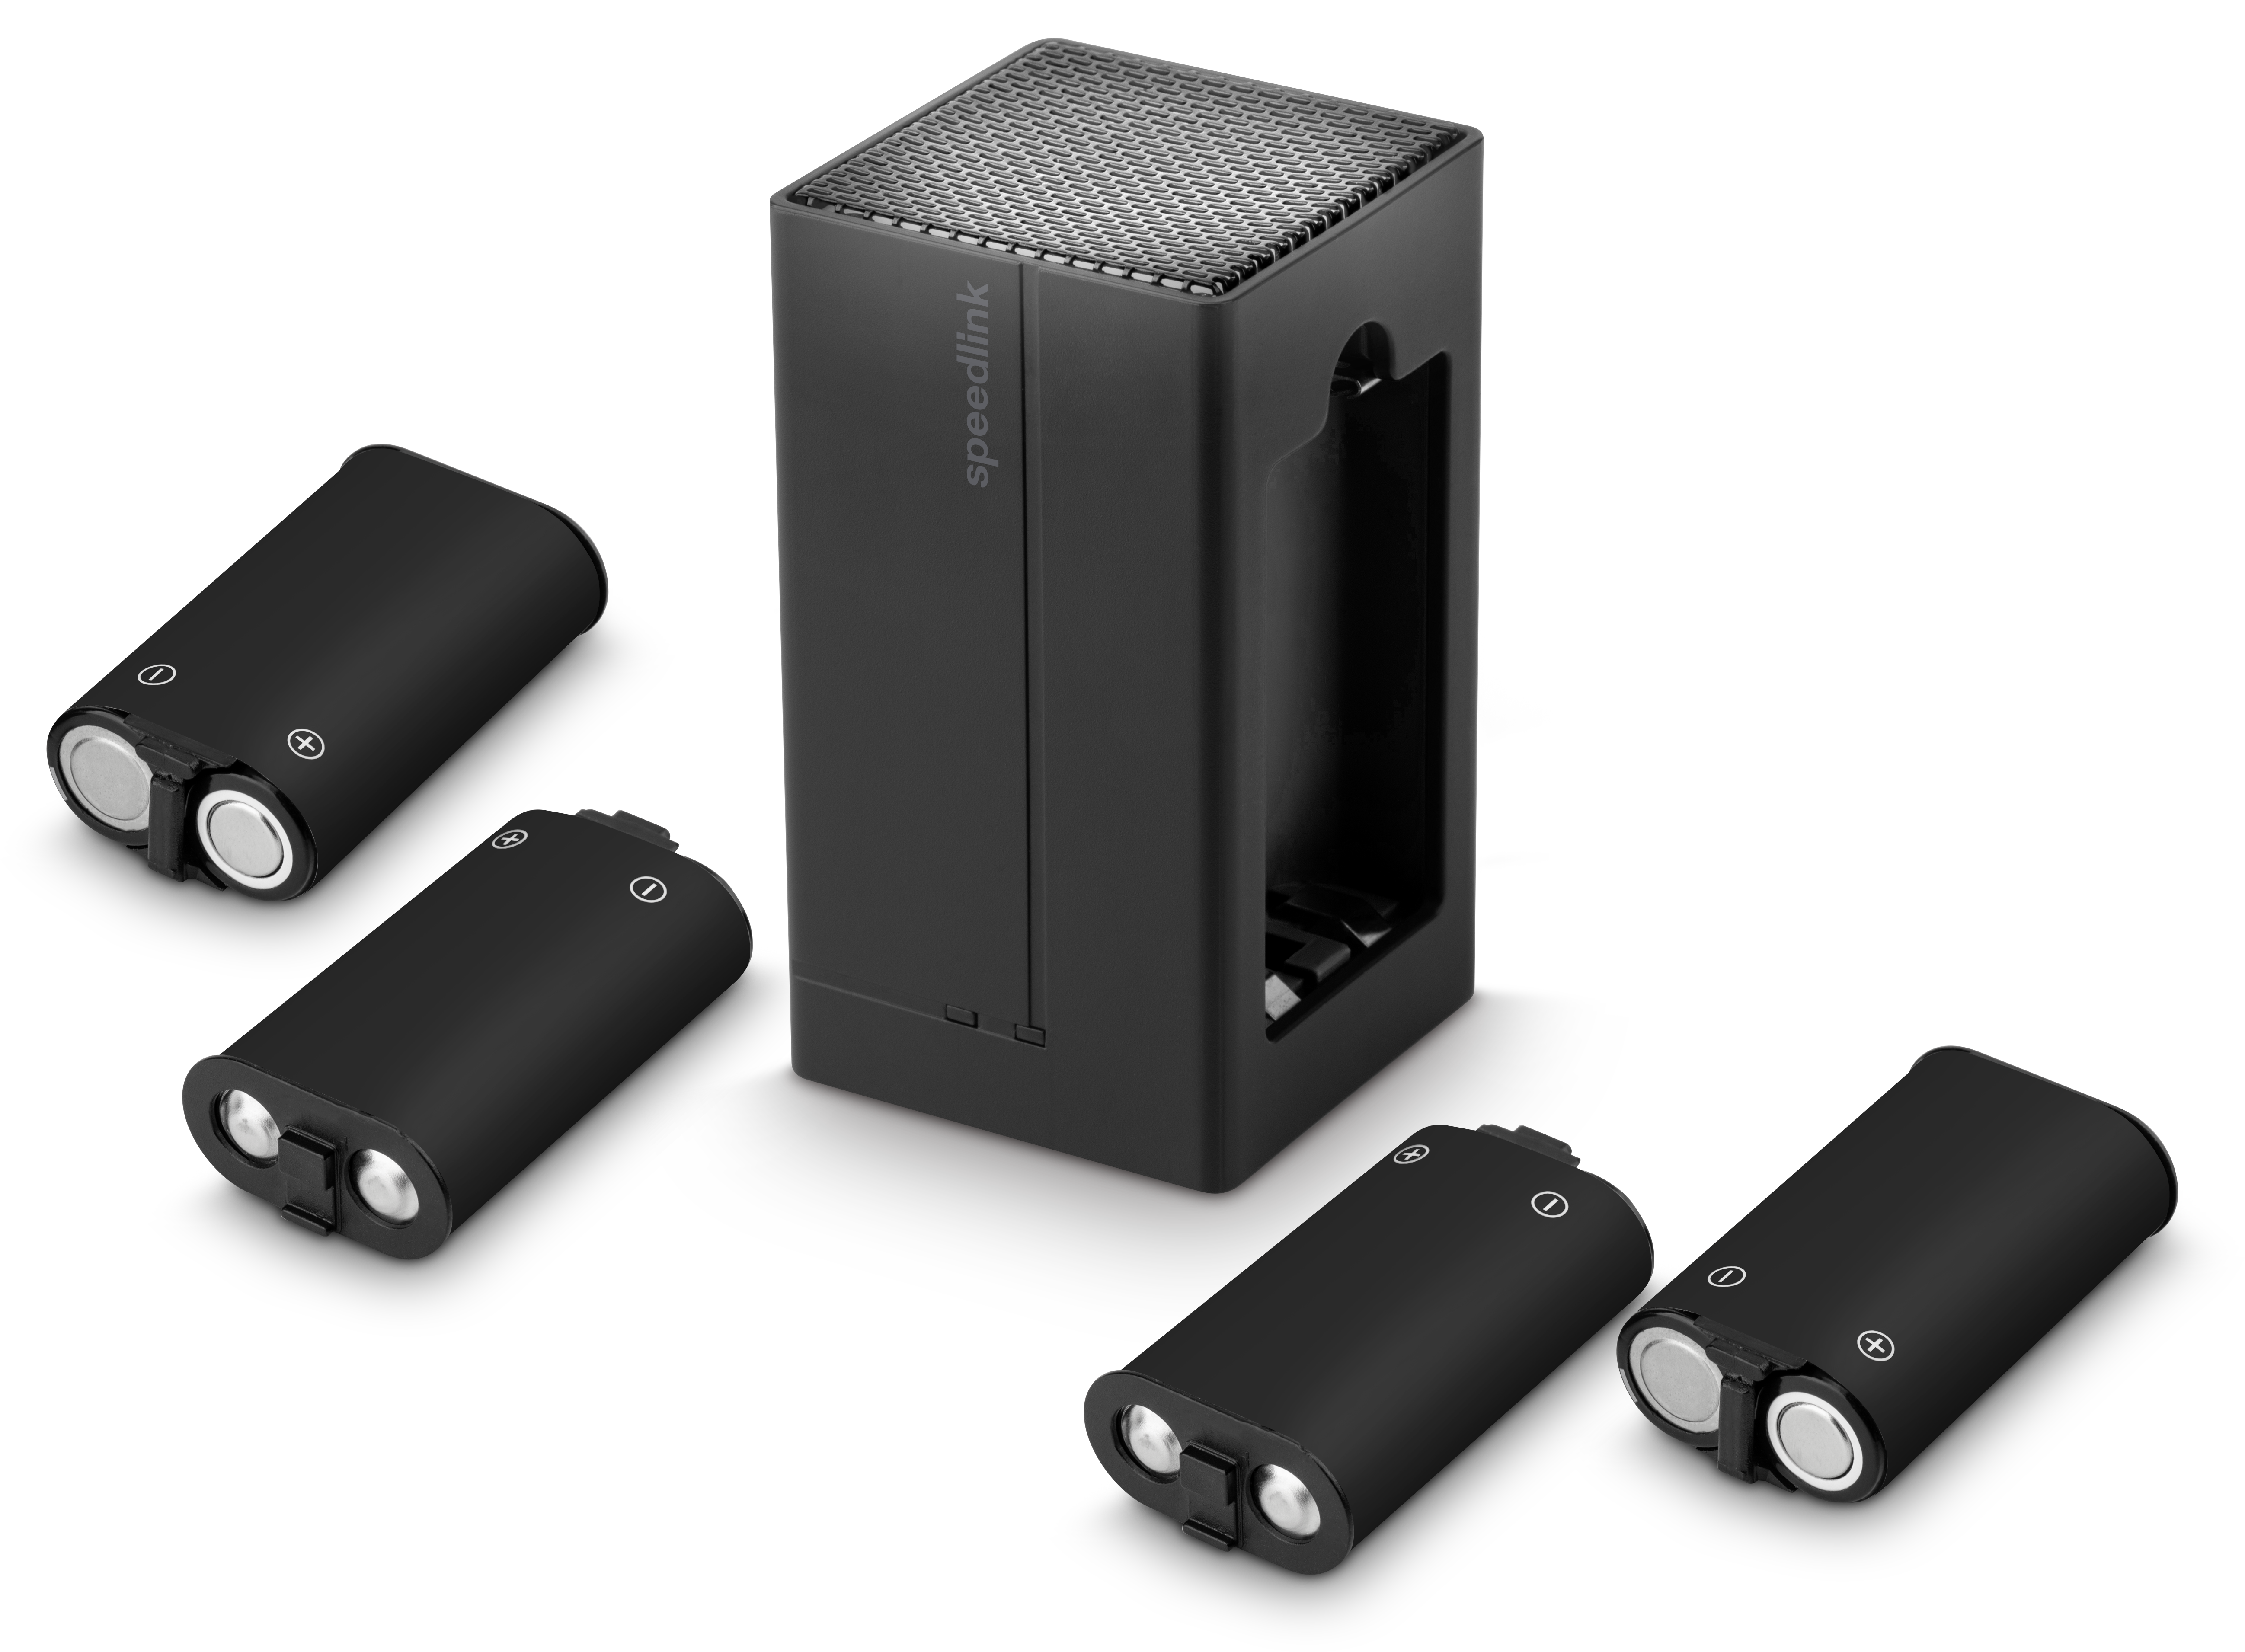 JUIZZ USB Dual Charger for Xbox Series X-S, black